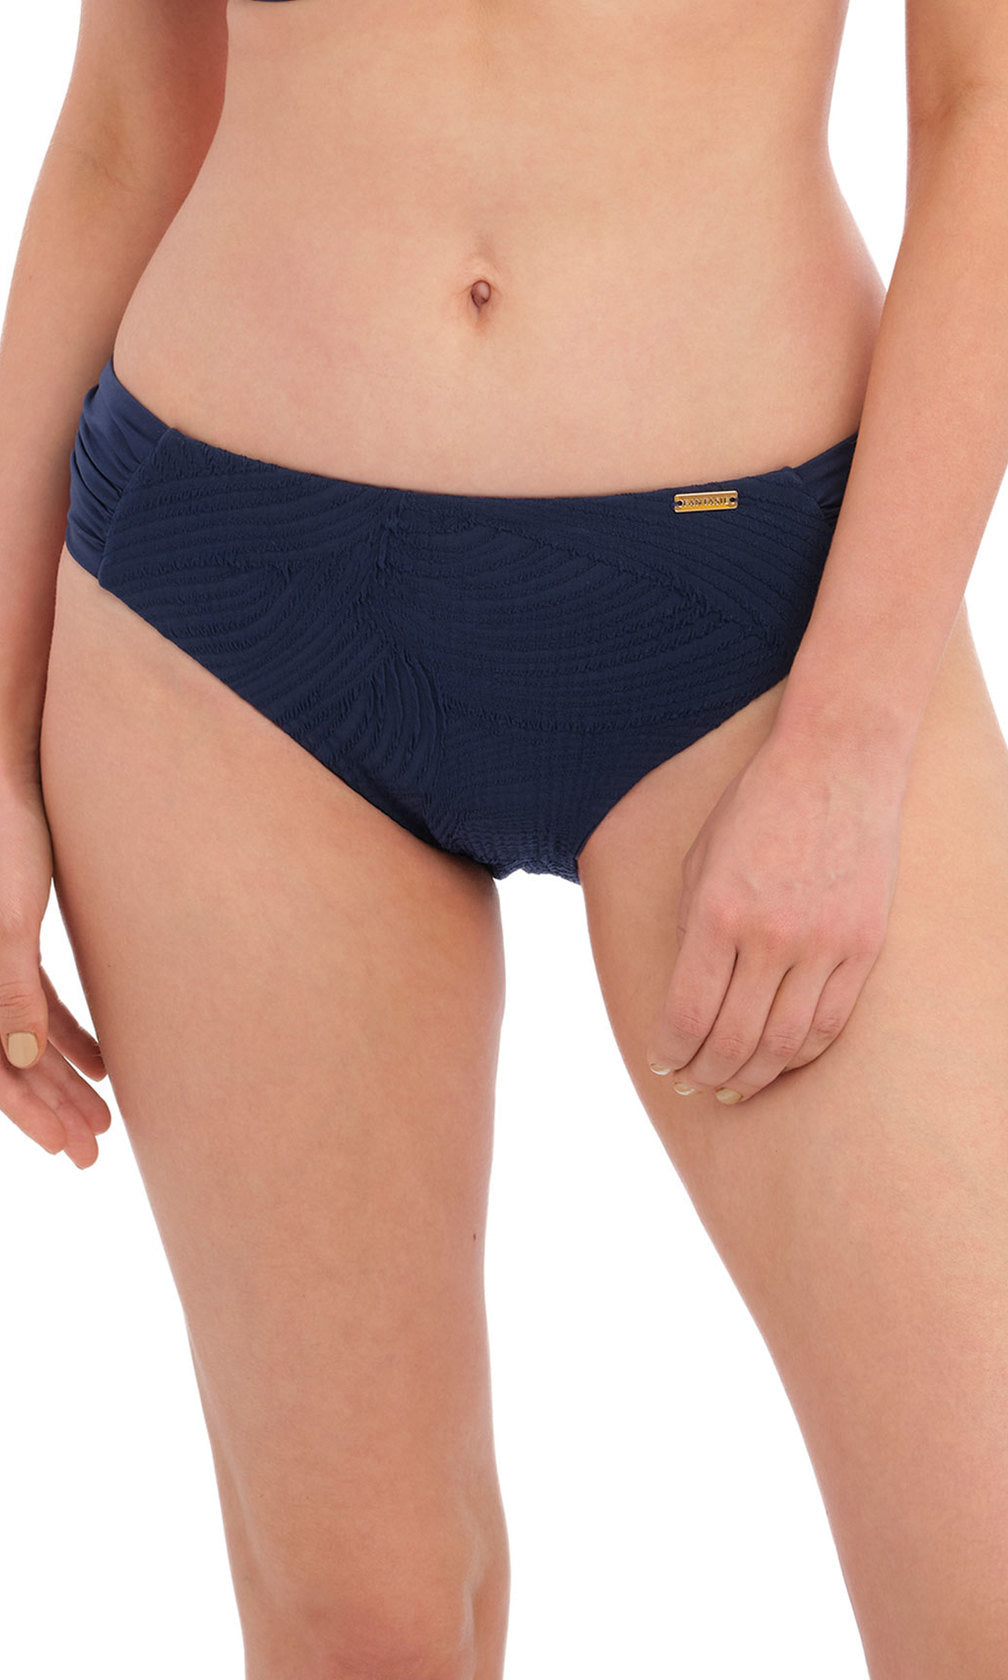 Ottawa Ink Mid Rise Brief, Special Order Size XS - 2XL